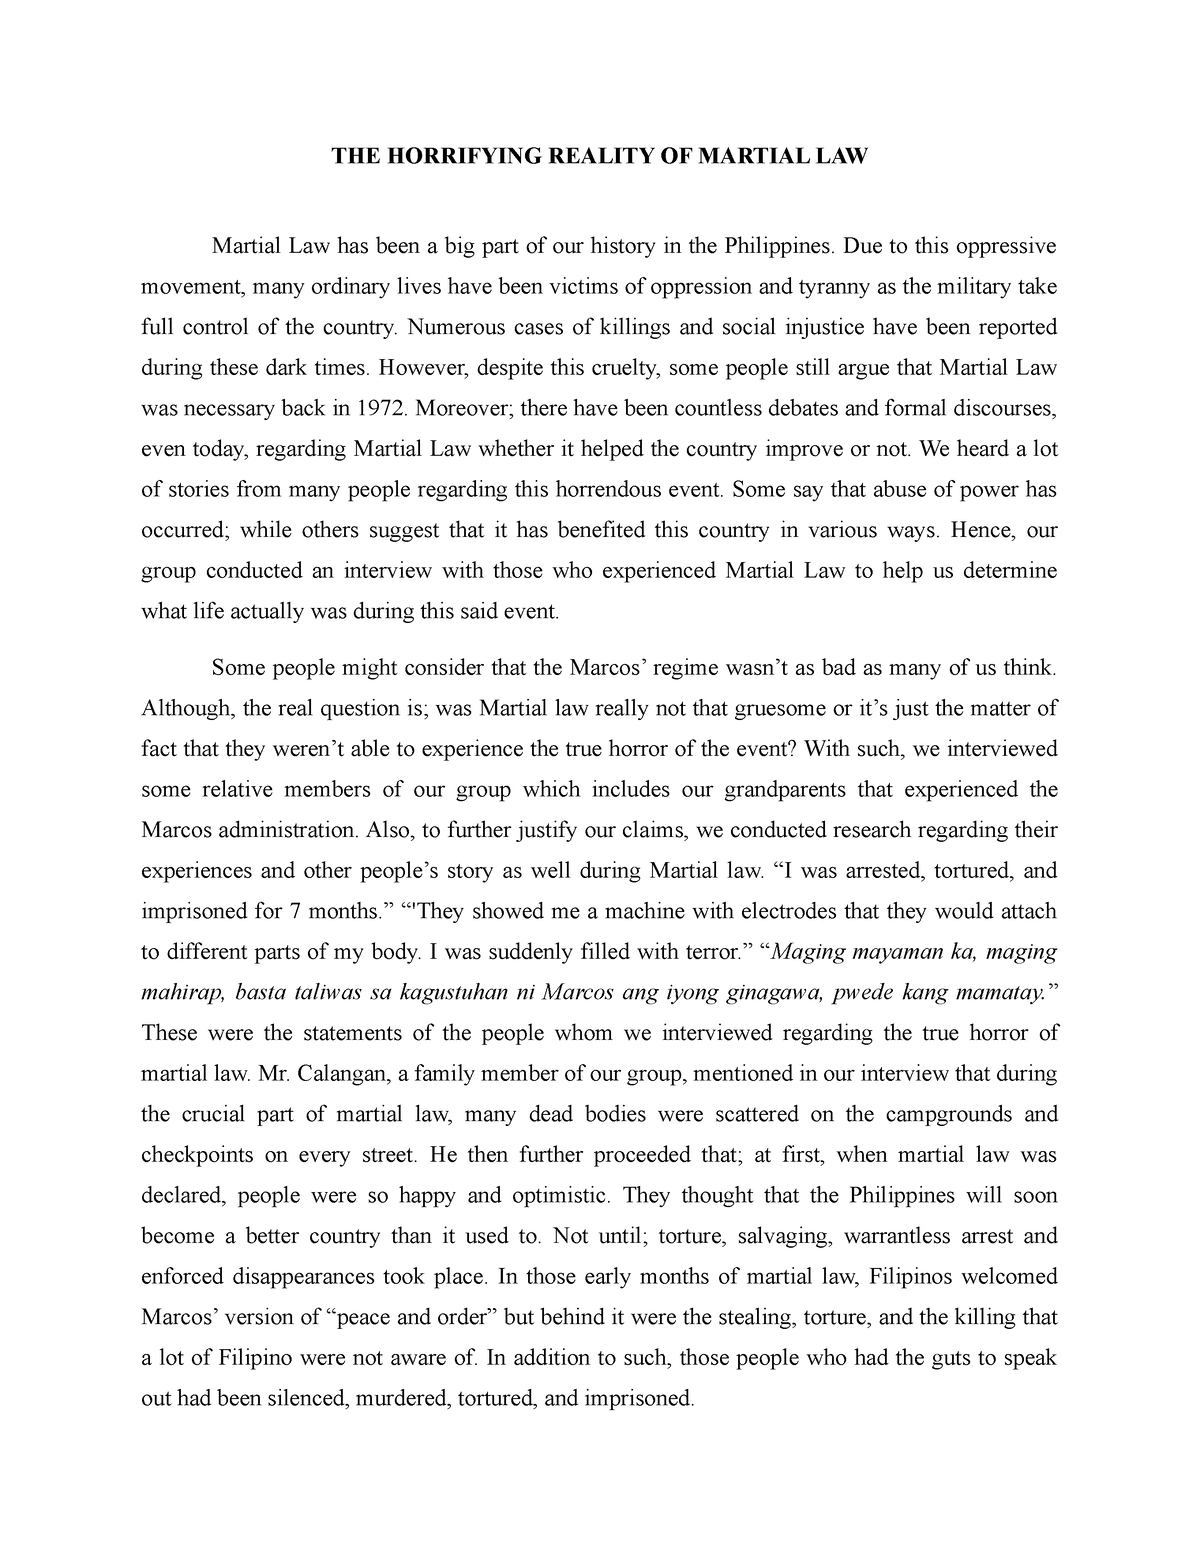 short essay about martial law